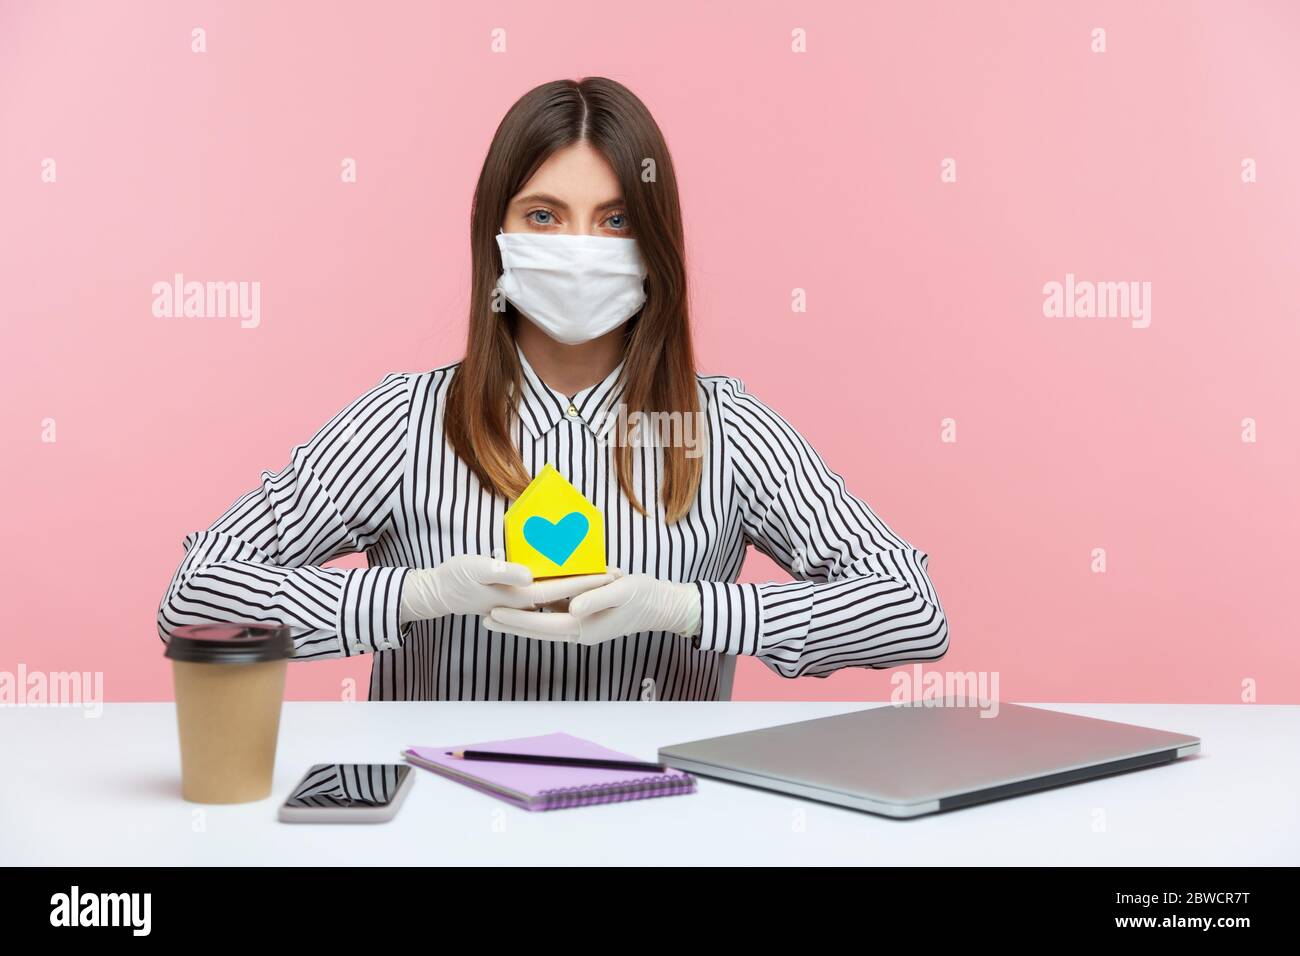 Renting during coronavirus quarantine. Woman real estate agency sitting at workplace, wearing hygienic mask and protective gloves, holding paper house Stock Photo